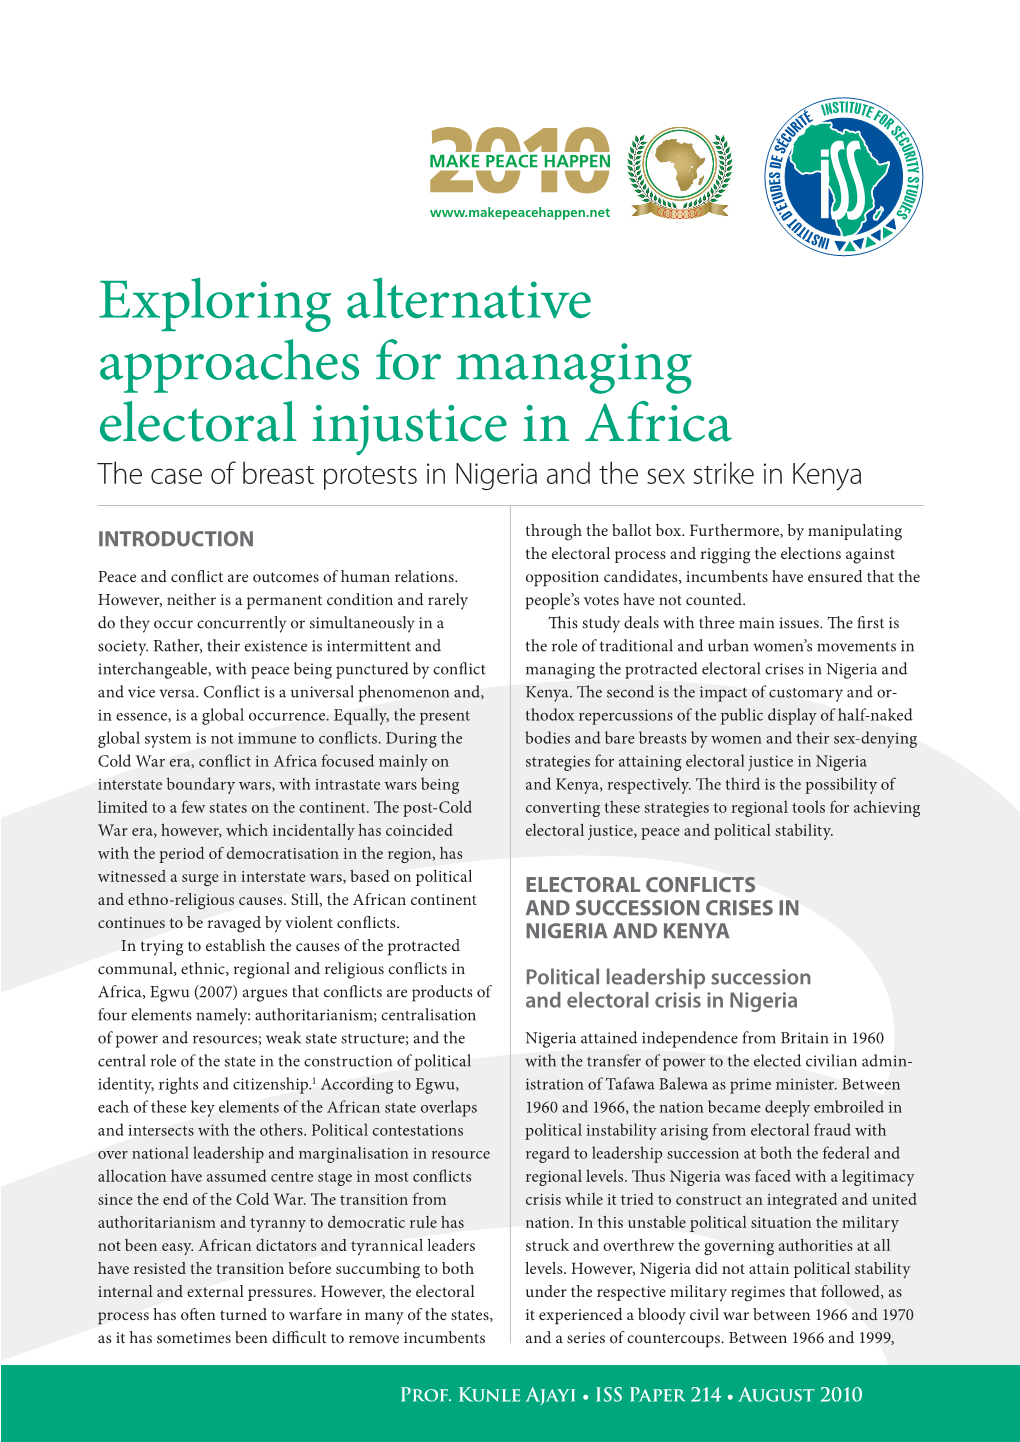 Exploring Alternative Approaches for Managing Electoral Injustice in Africa the Case of Breast Protests in Nigeria and the Sex Strike in Kenya